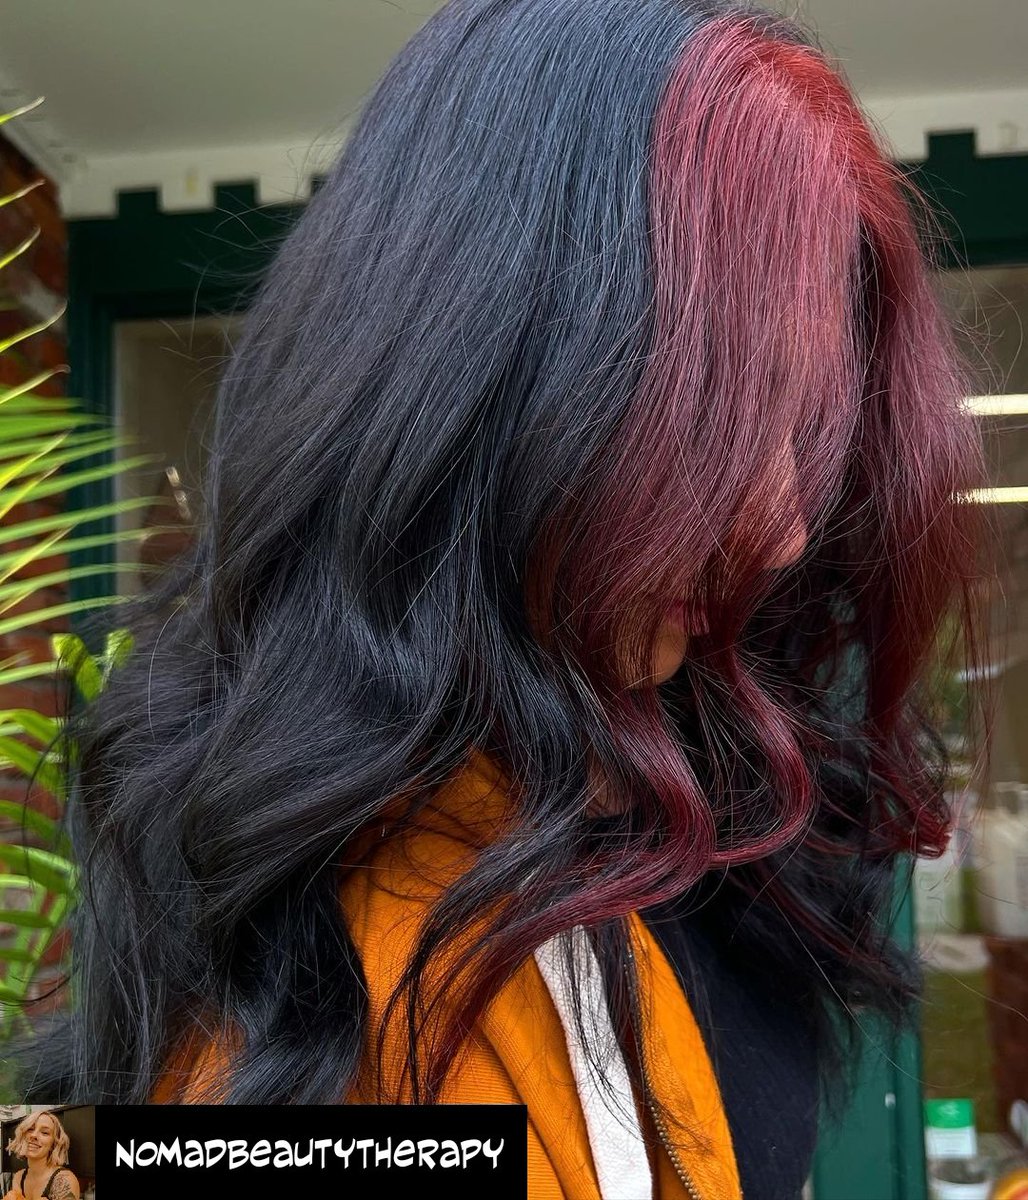 ♥️🖤❤️‍🔥💋
.
.
.
.
. 
Reposted @nomadbeautytherapy 

v appropriate switch up for the season.

Booking all months through the end of the year ✨🦋
Online or DM 248-759-1203 

#customhaircolor #michiganhairstylist #fypシ #bestofhair #blackandredhair  #stylistssupportingstylists